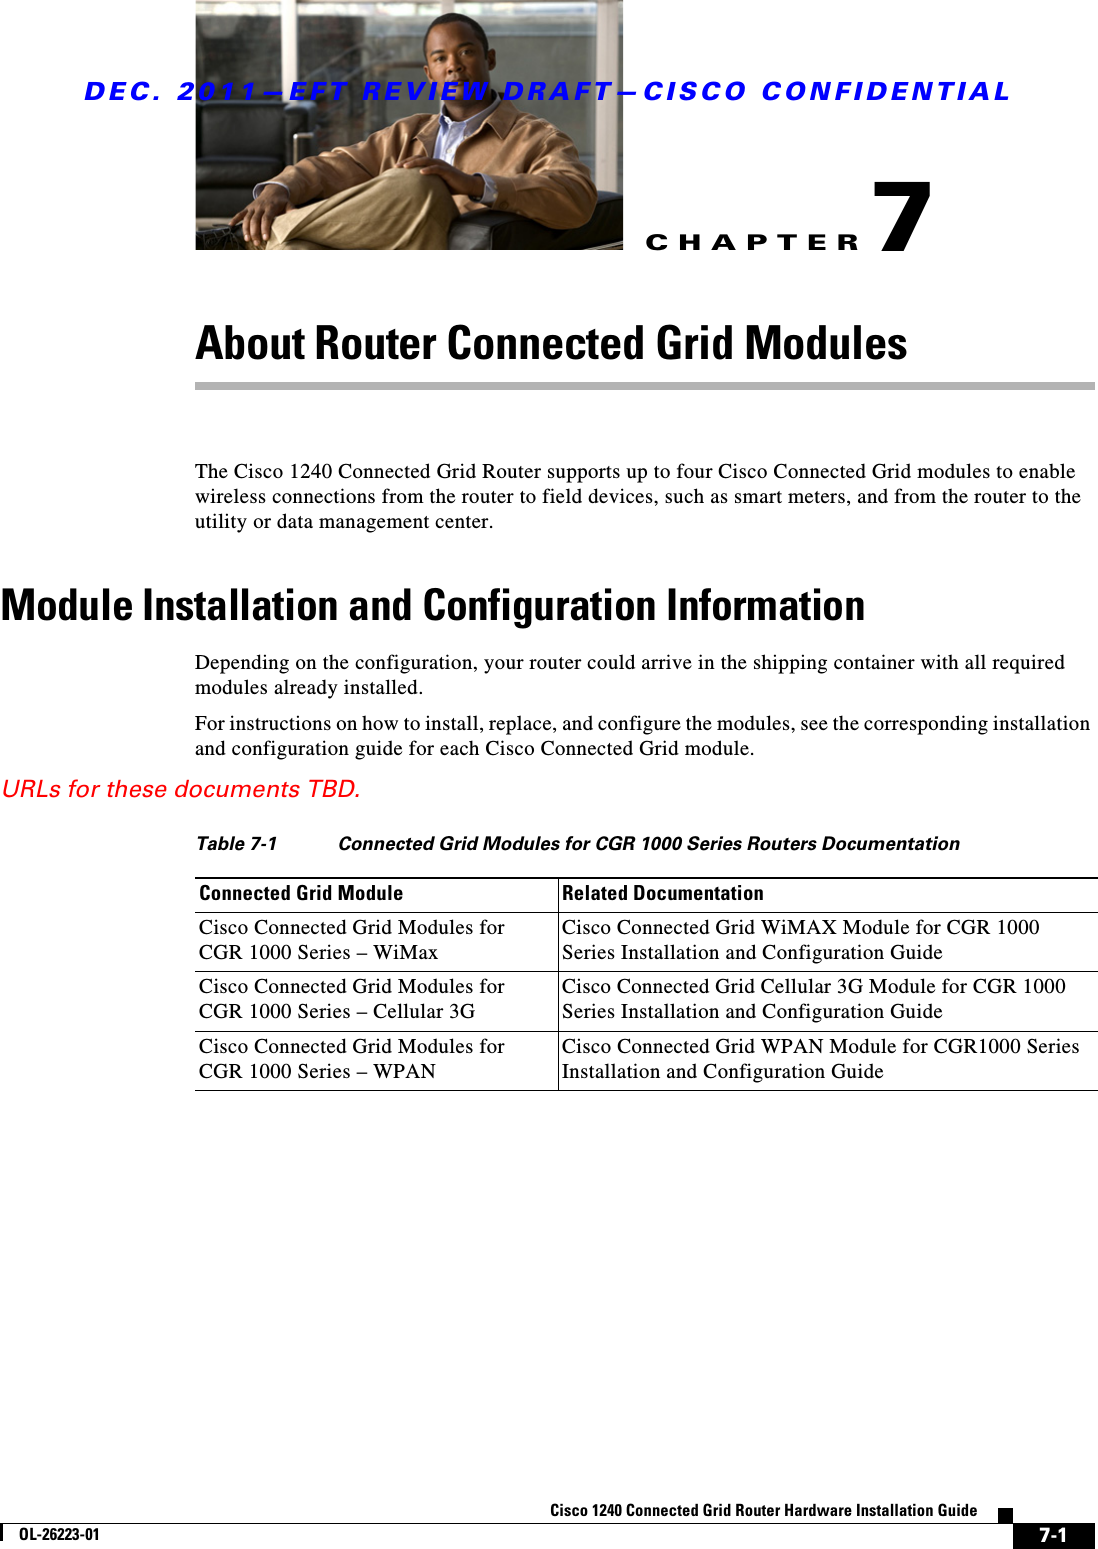 CHAPTERDEC. 2011—EFT REVIEW DRAFT—CISCO CONFIDENTIAL7-1Cisco 1240 Connected Grid Router Hardware Installation GuideOL-26223-017About Router Connected Grid ModulesThe Cisco 1240 Connected Grid Router supports up to four Cisco Connected Grid modules to enable wireless connections from the router to field devices, such as smart meters, and from the router to the utility or data management center. Module Installation and Configuration InformationDepending on the configuration, your router could arrive in the shipping container with all required modules already installed. For instructions on how to install, replace, and configure the modules, see the corresponding installation and configuration guide for each Cisco Connected Grid module.URLs for these documents TBD.Table 7-1 Connected Grid Modules for CGR 1000 Series Routers DocumentationConnected Grid Module Related DocumentationCisco Connected Grid Modules for CGR 1000 Series – WiMax Cisco Connected Grid WiMAX Module for CGR 1000 Series Installation and Configuration Guide Cisco Connected Grid Modules for CGR 1000 Series – Cellular 3G Cisco Connected Grid Cellular 3G Module for CGR 1000 Series Installation and Configuration GuideCisco Connected Grid Modules for CGR 1000 Series – WPAN Cisco Connected Grid WPAN Module for CGR1000 Series Installation and Configuration Guide